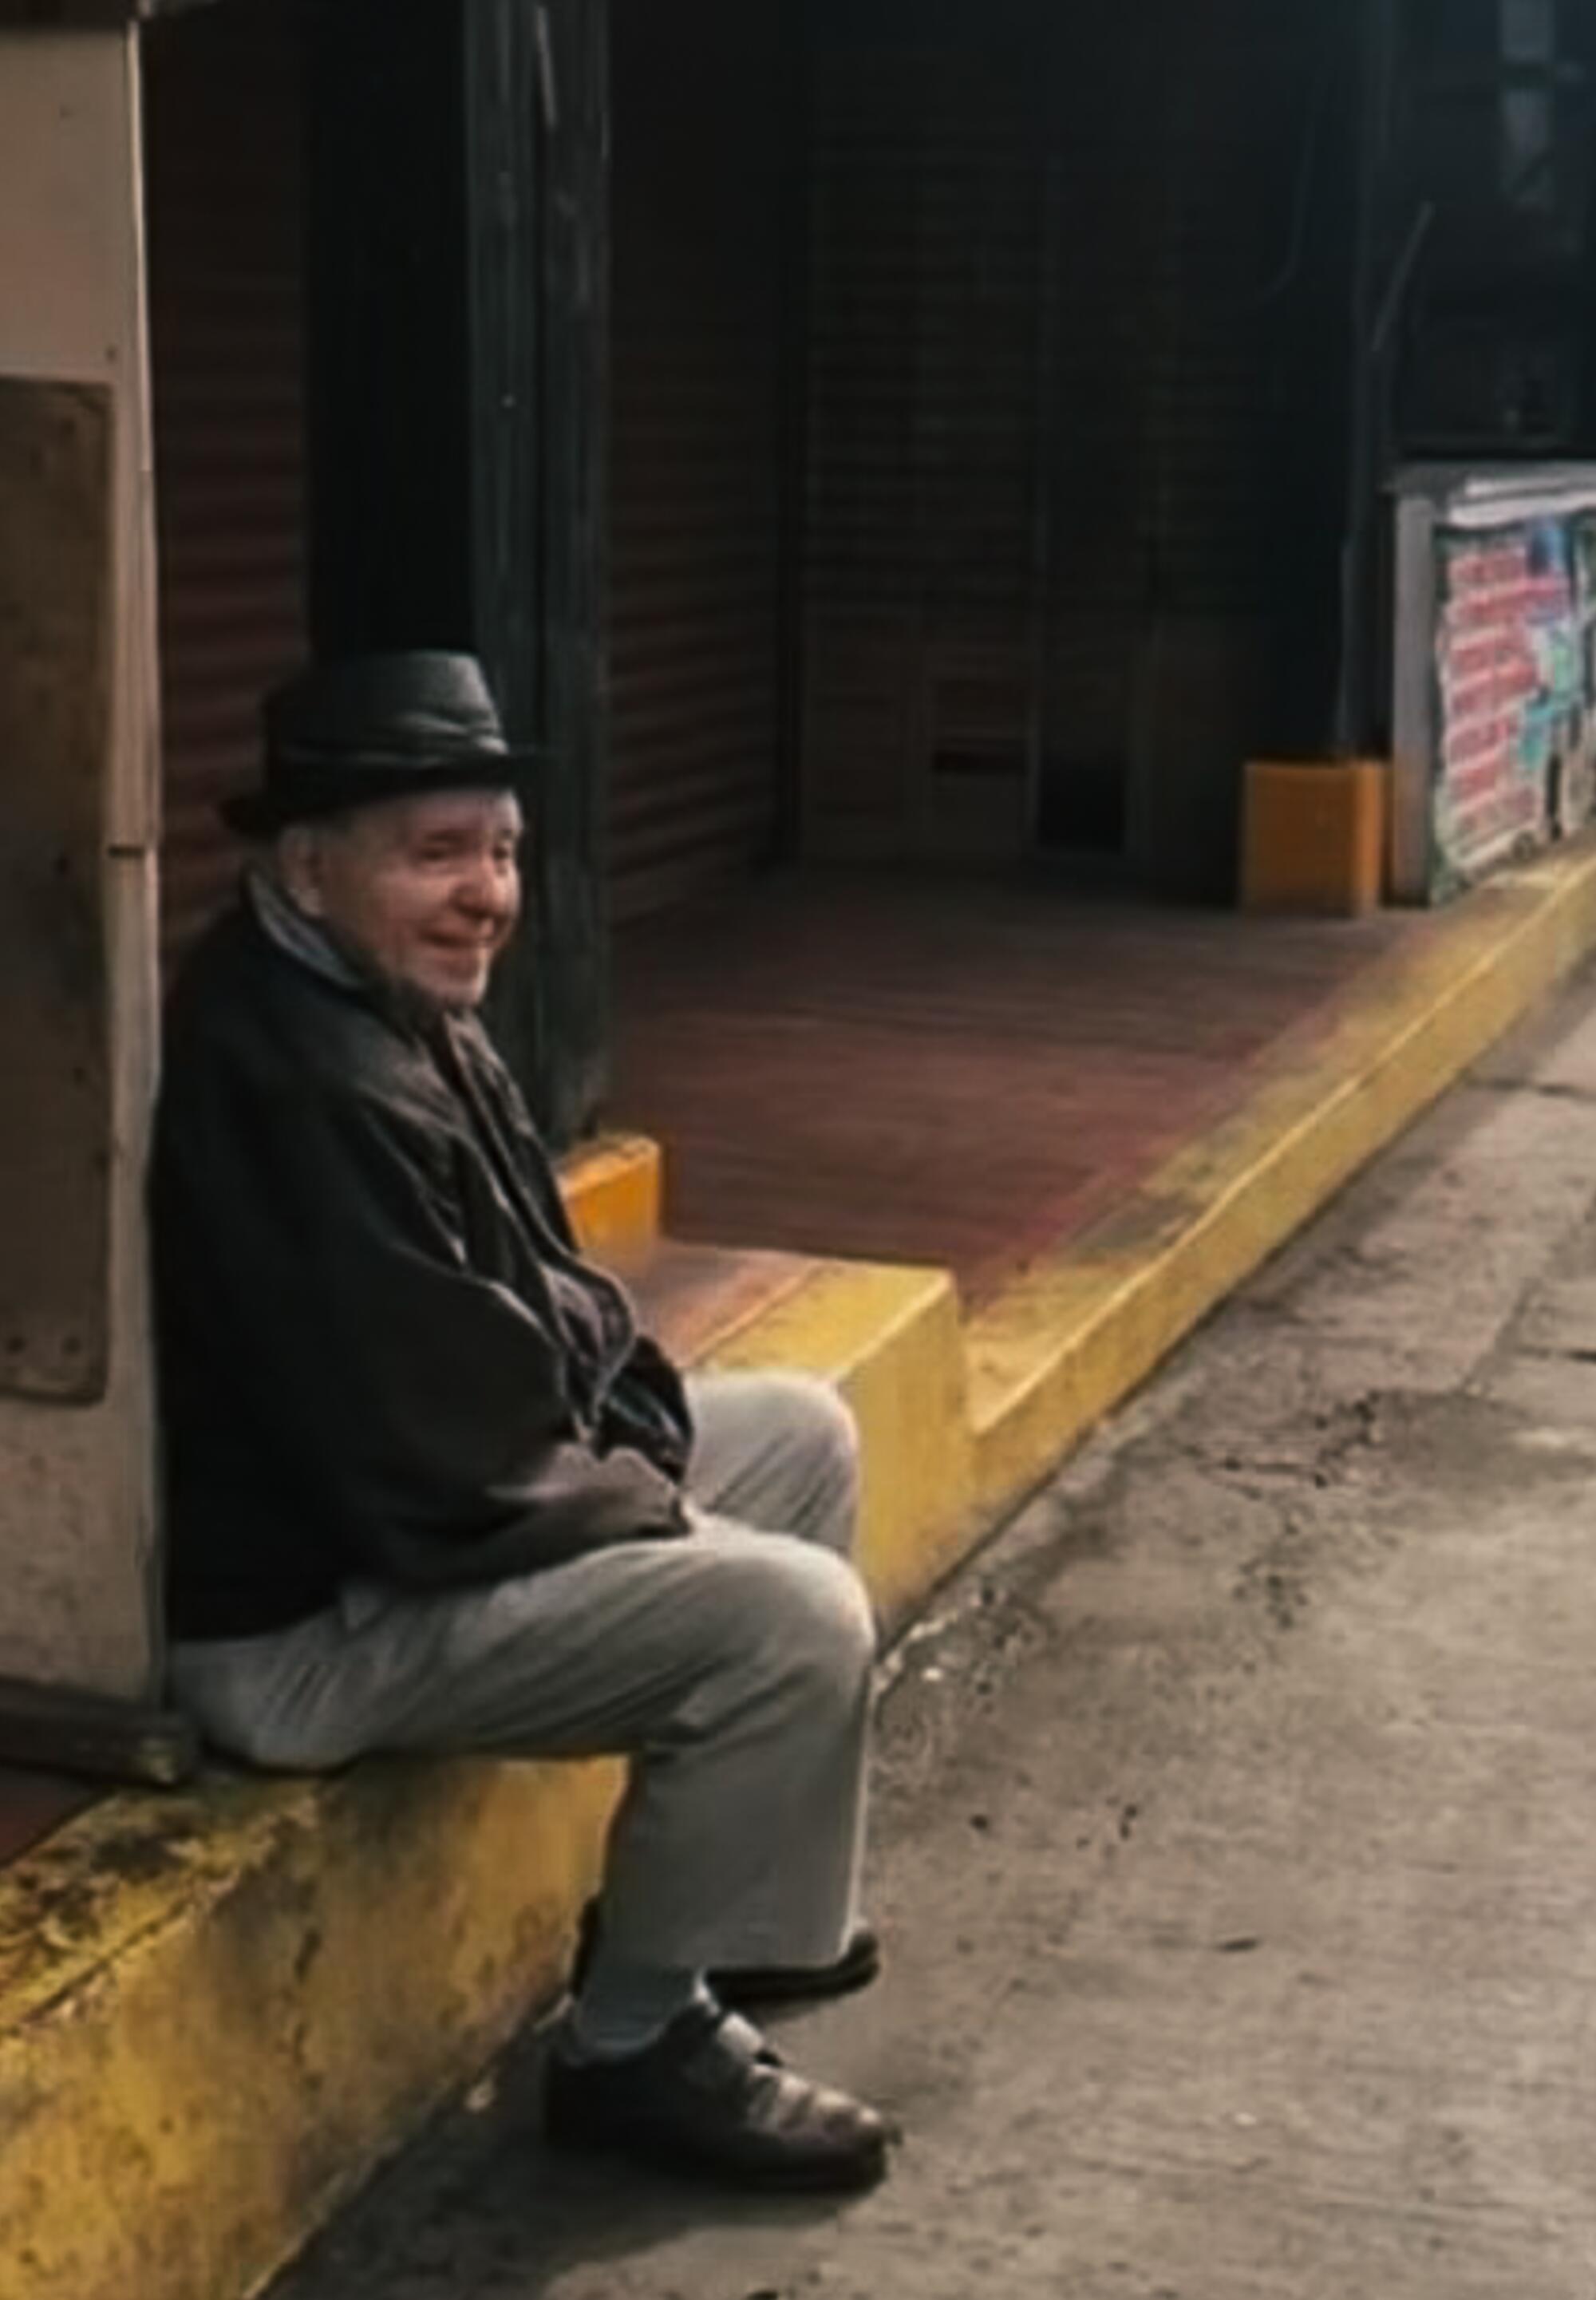 An older man sits and smiles on a curb